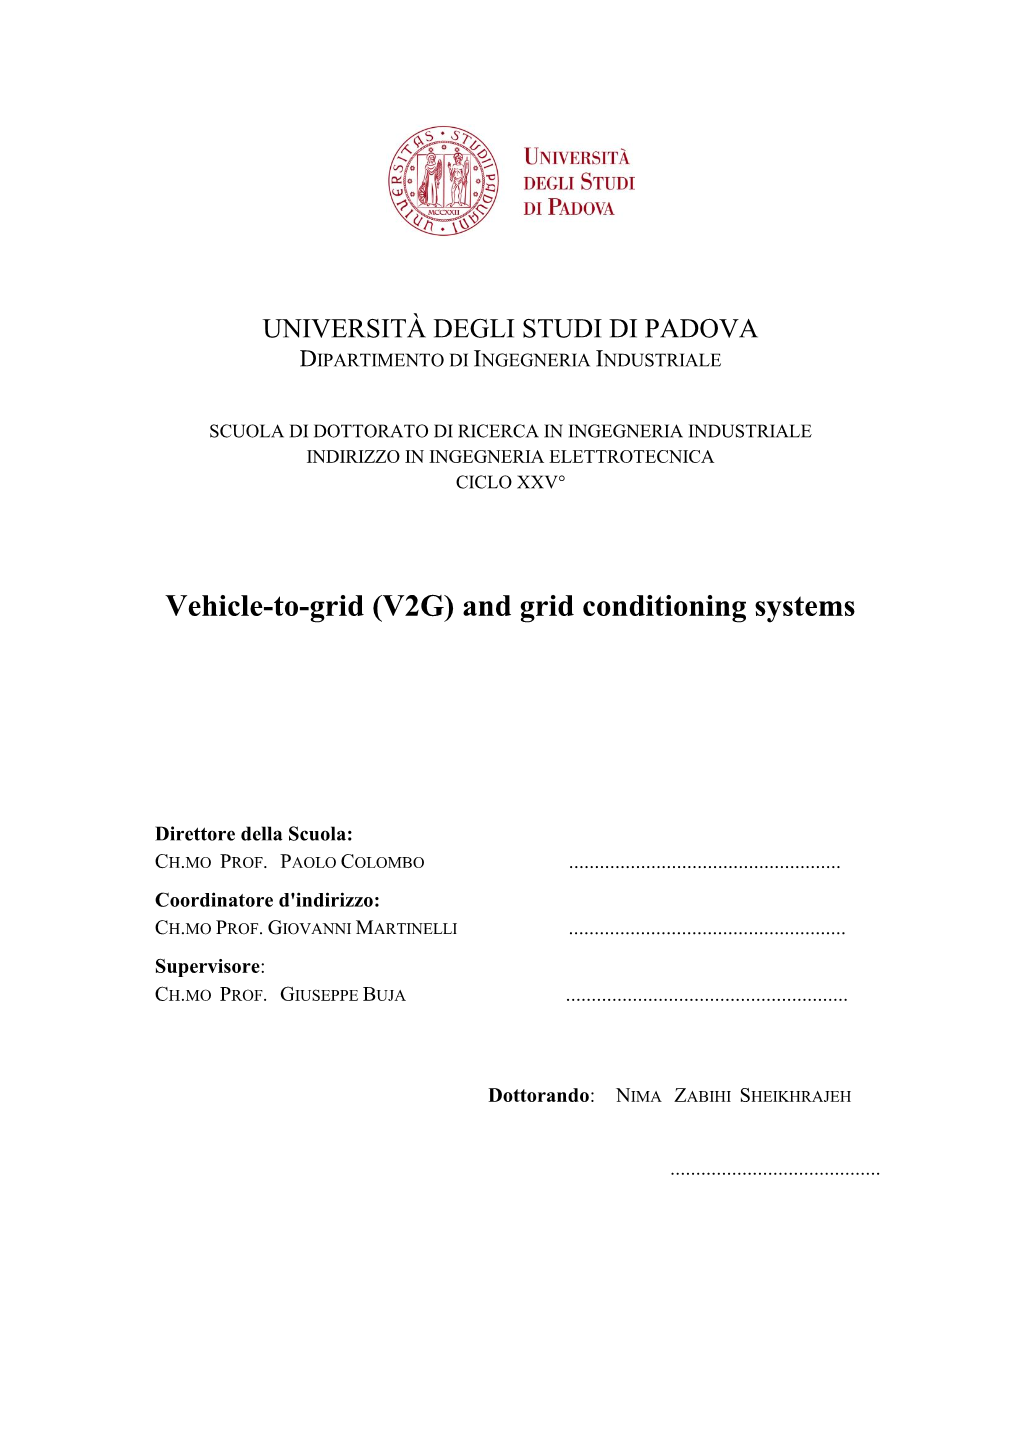 Vehicle-To-Grid (V2G) and Grid Conditioning Systems